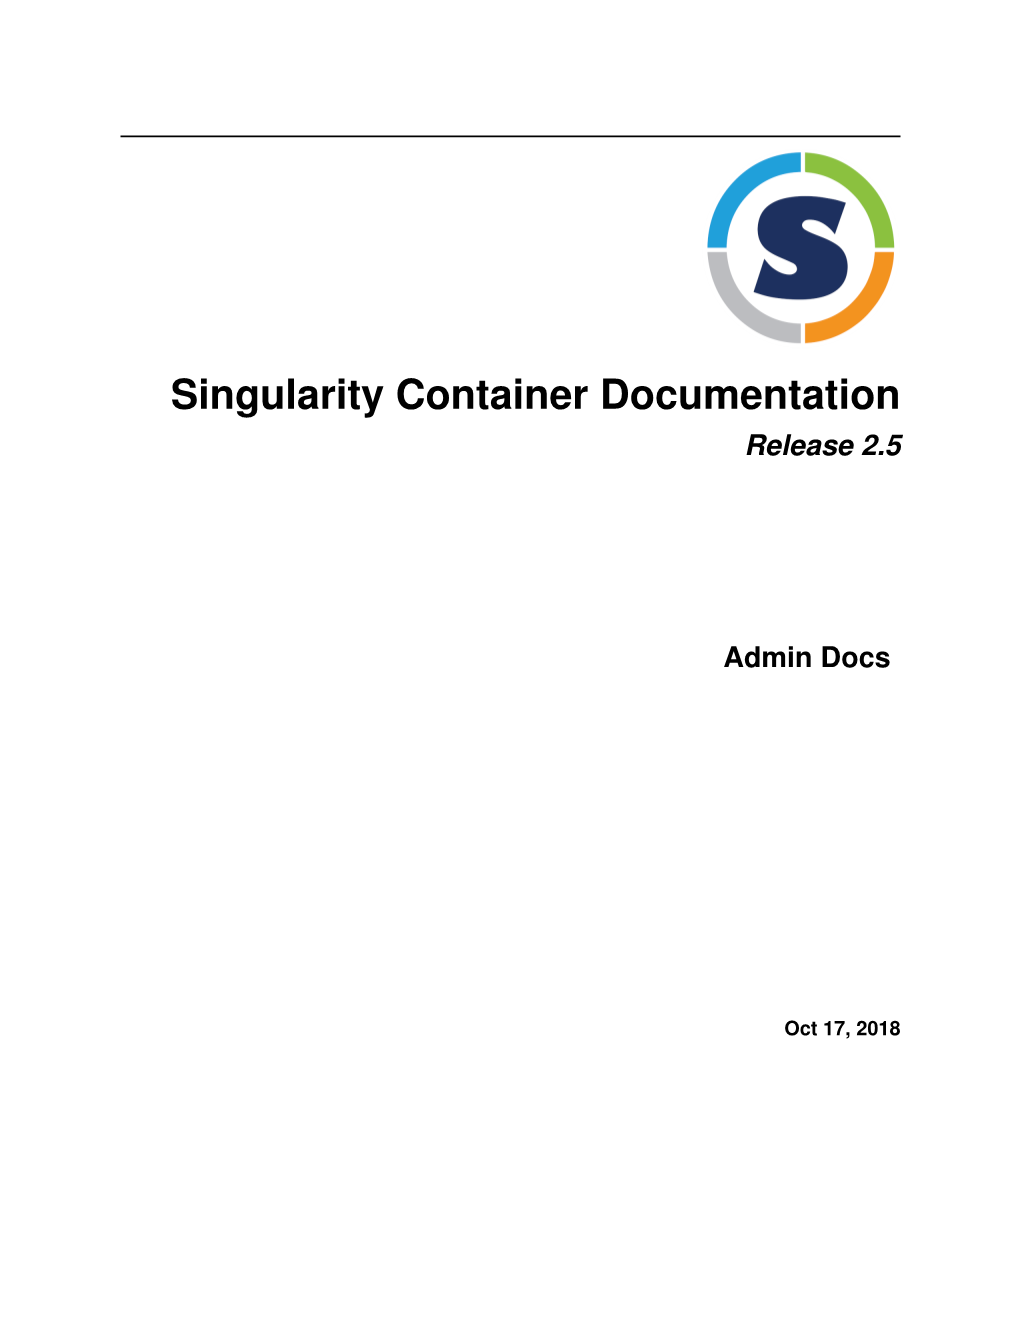 Singularity Container Documentation Release 2.5